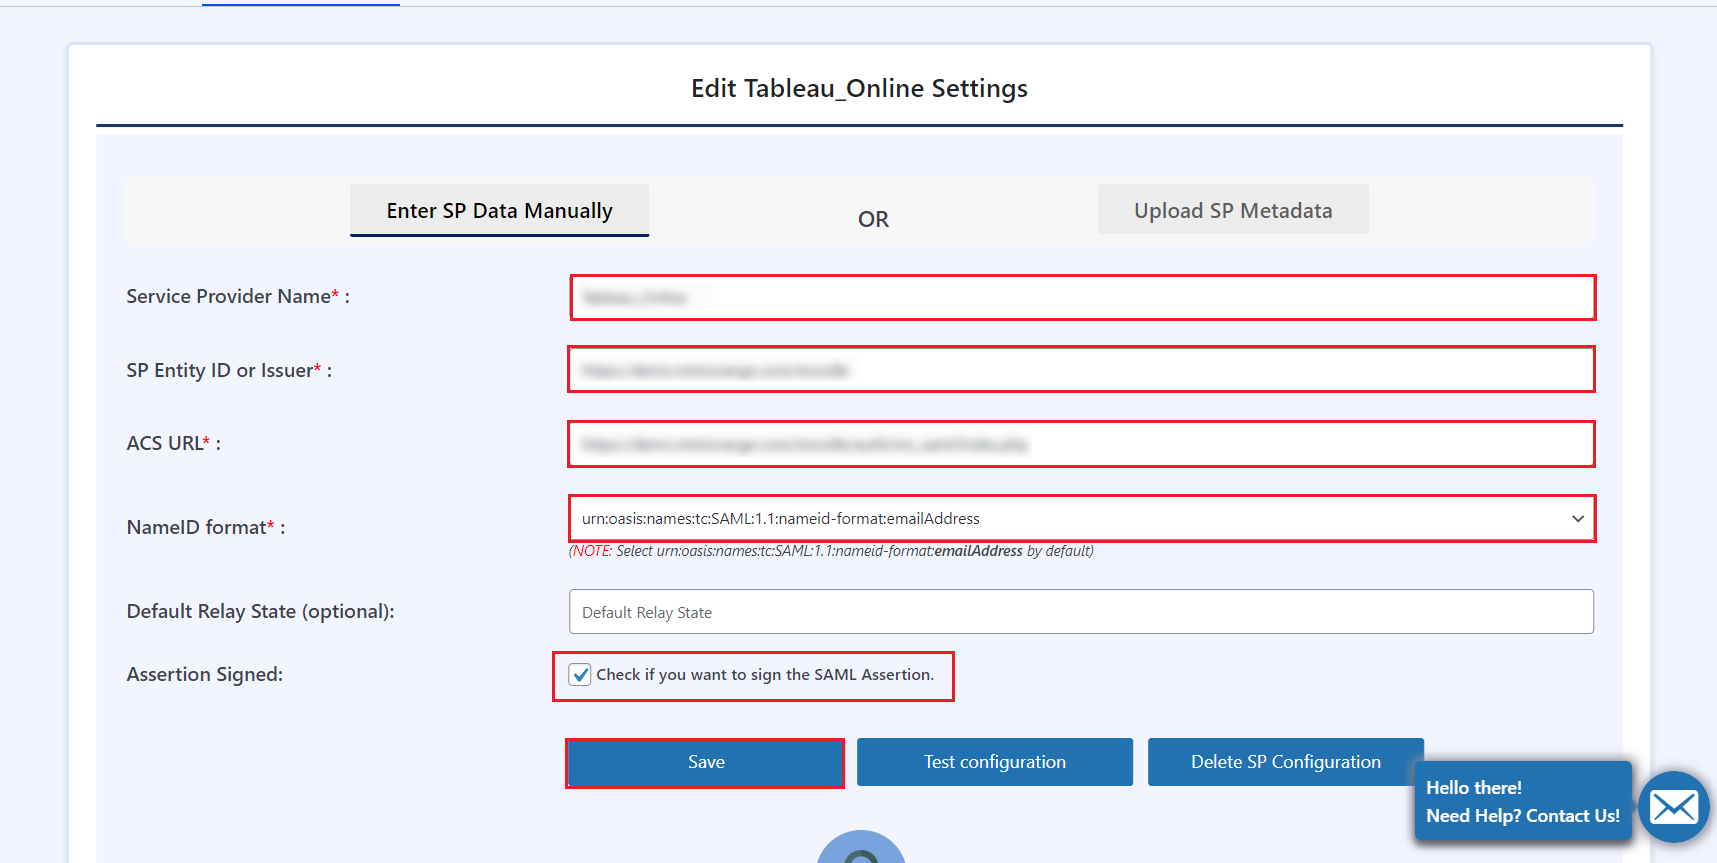  Absorb LMS SSO login for WP users |enter sp info